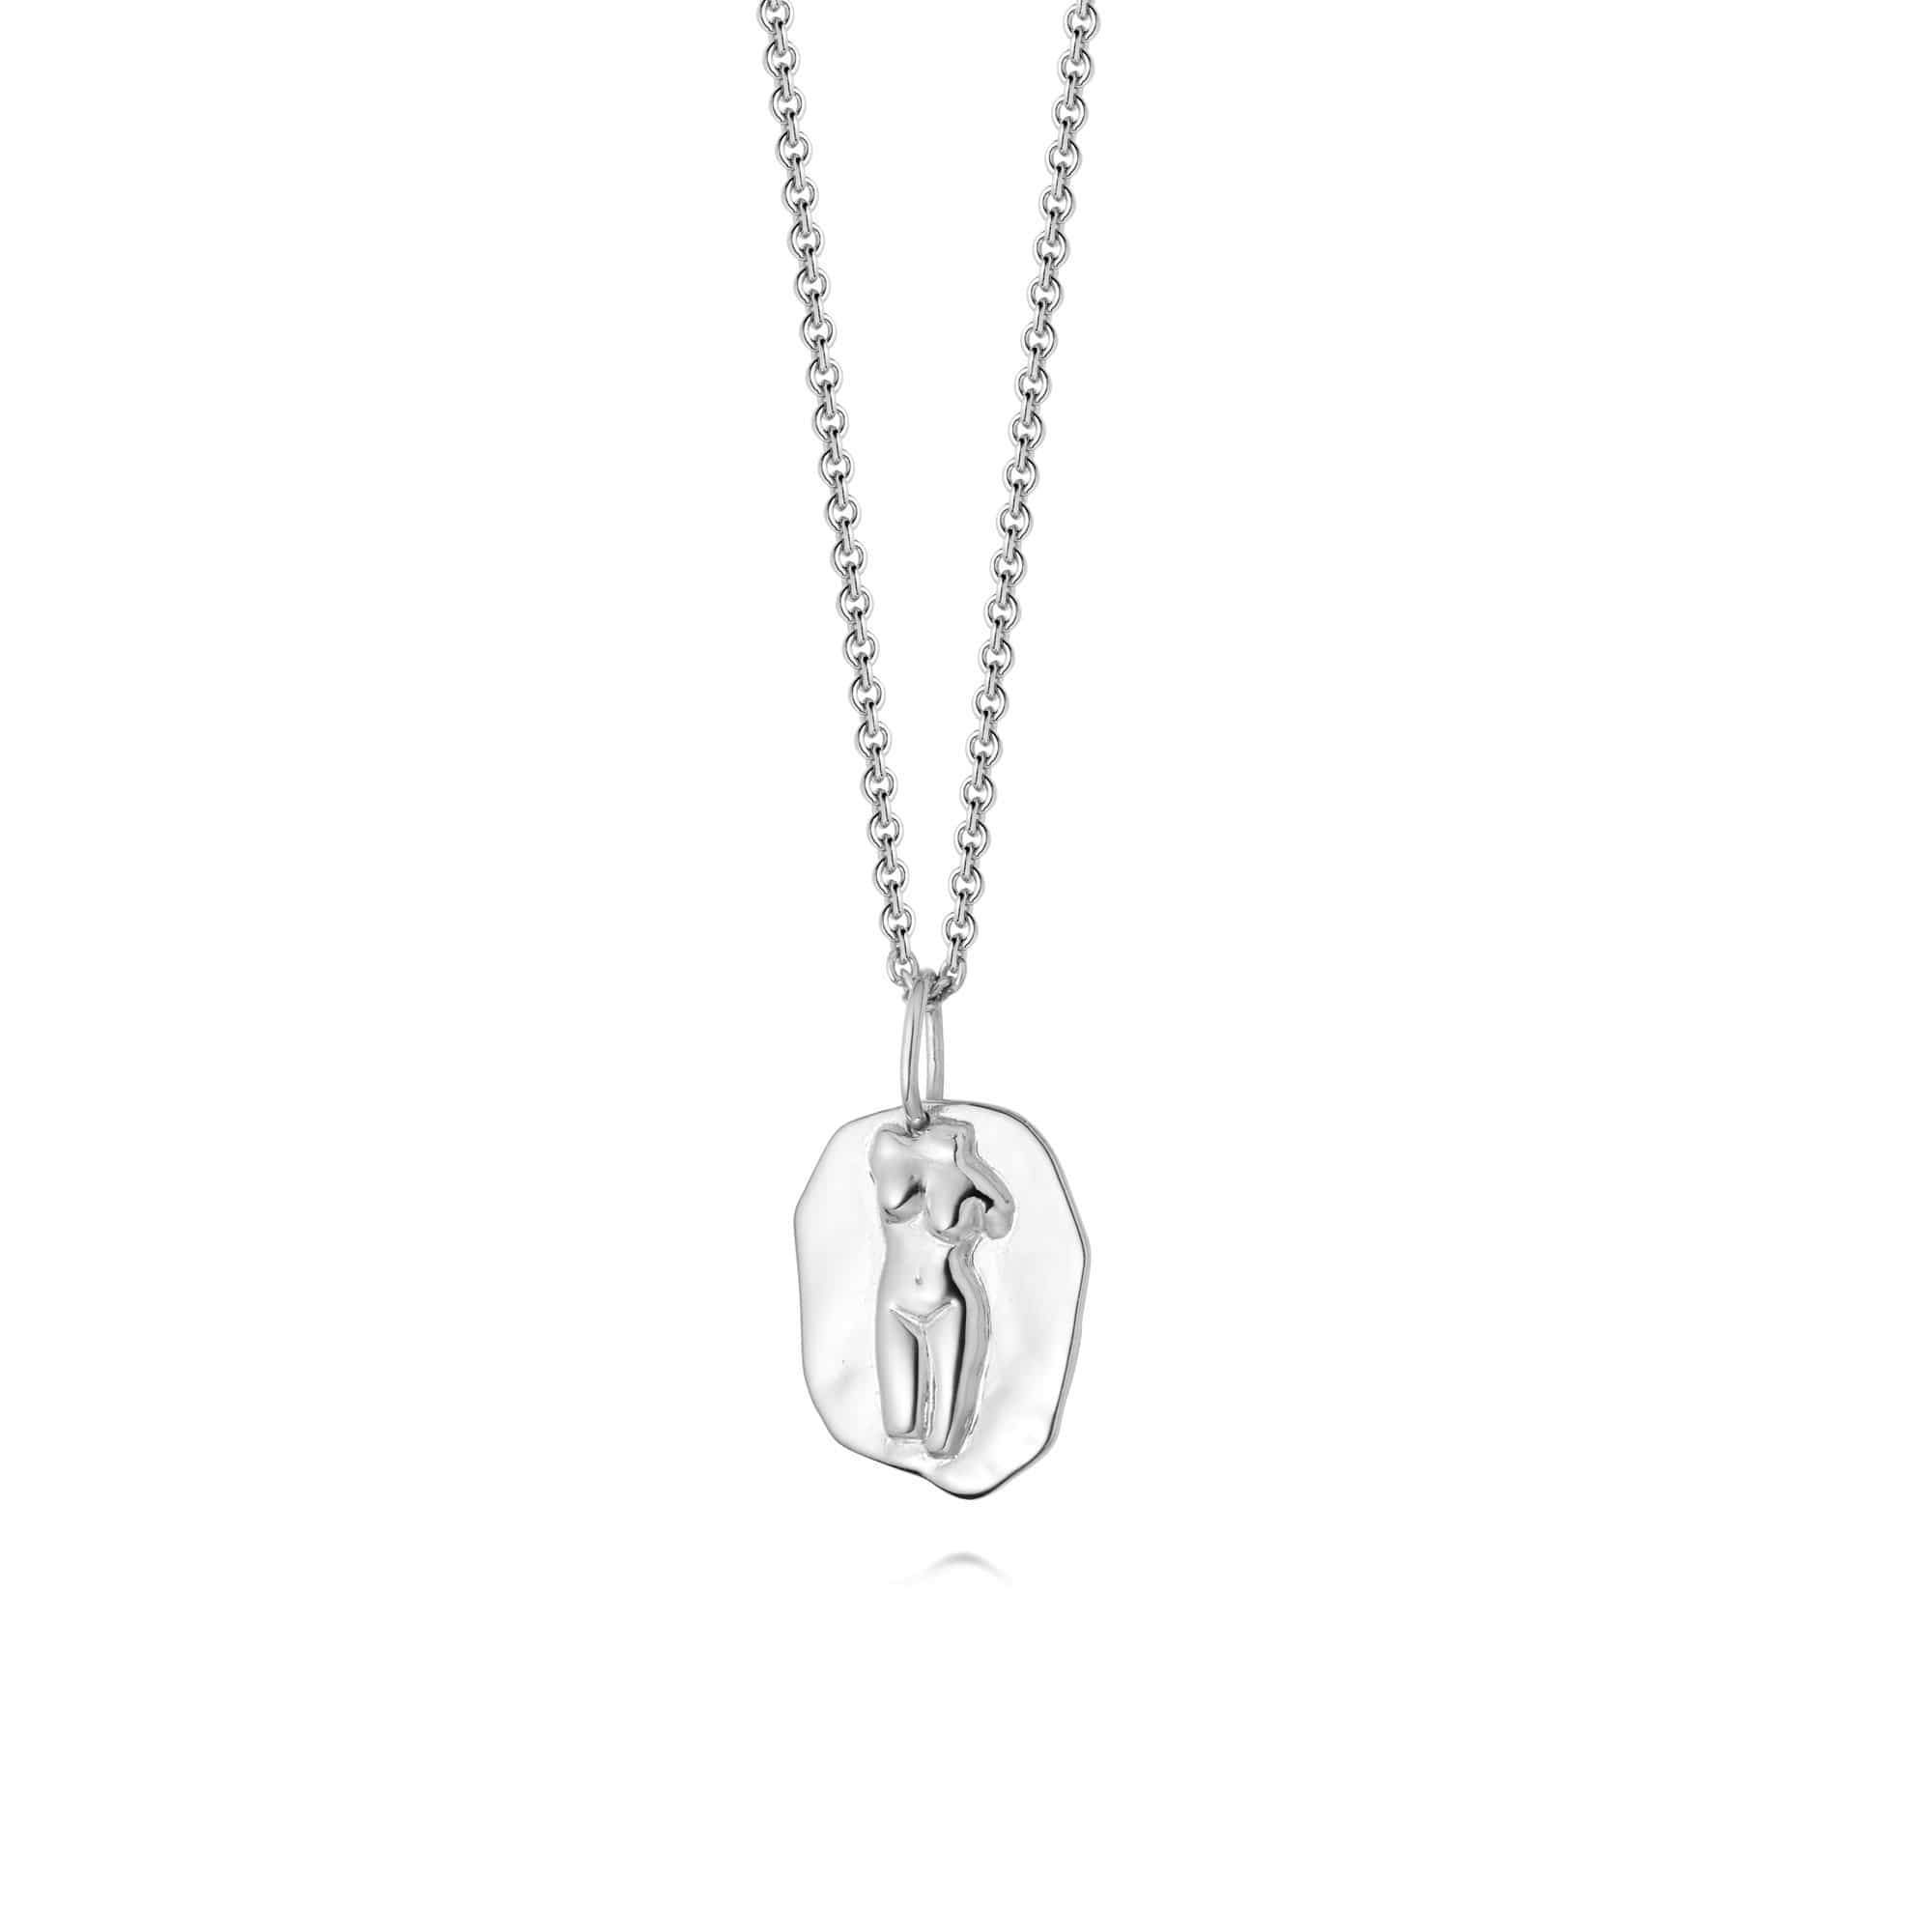 Daisy London APHRODITE NECKLACE - STERLING SILVER